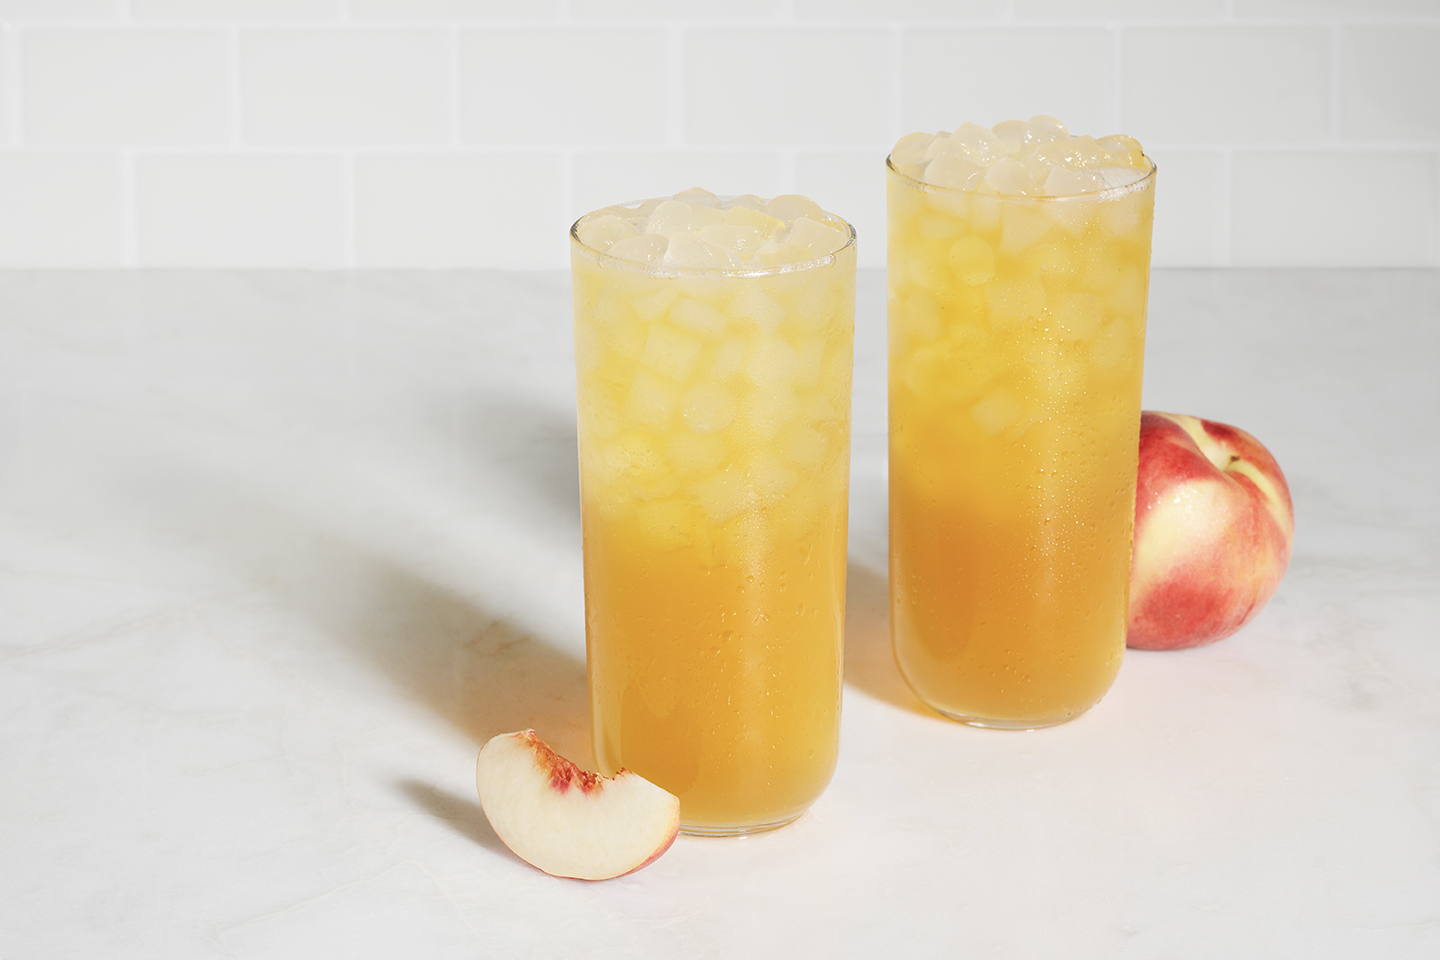 The White Peach Sunjoy ® is a refreshing combination of Chick-fil-A’s Sunjoy® beverage, blending our classic Lemonade and freshly-brewedSweetened Iced Tea, with white peach flavors.